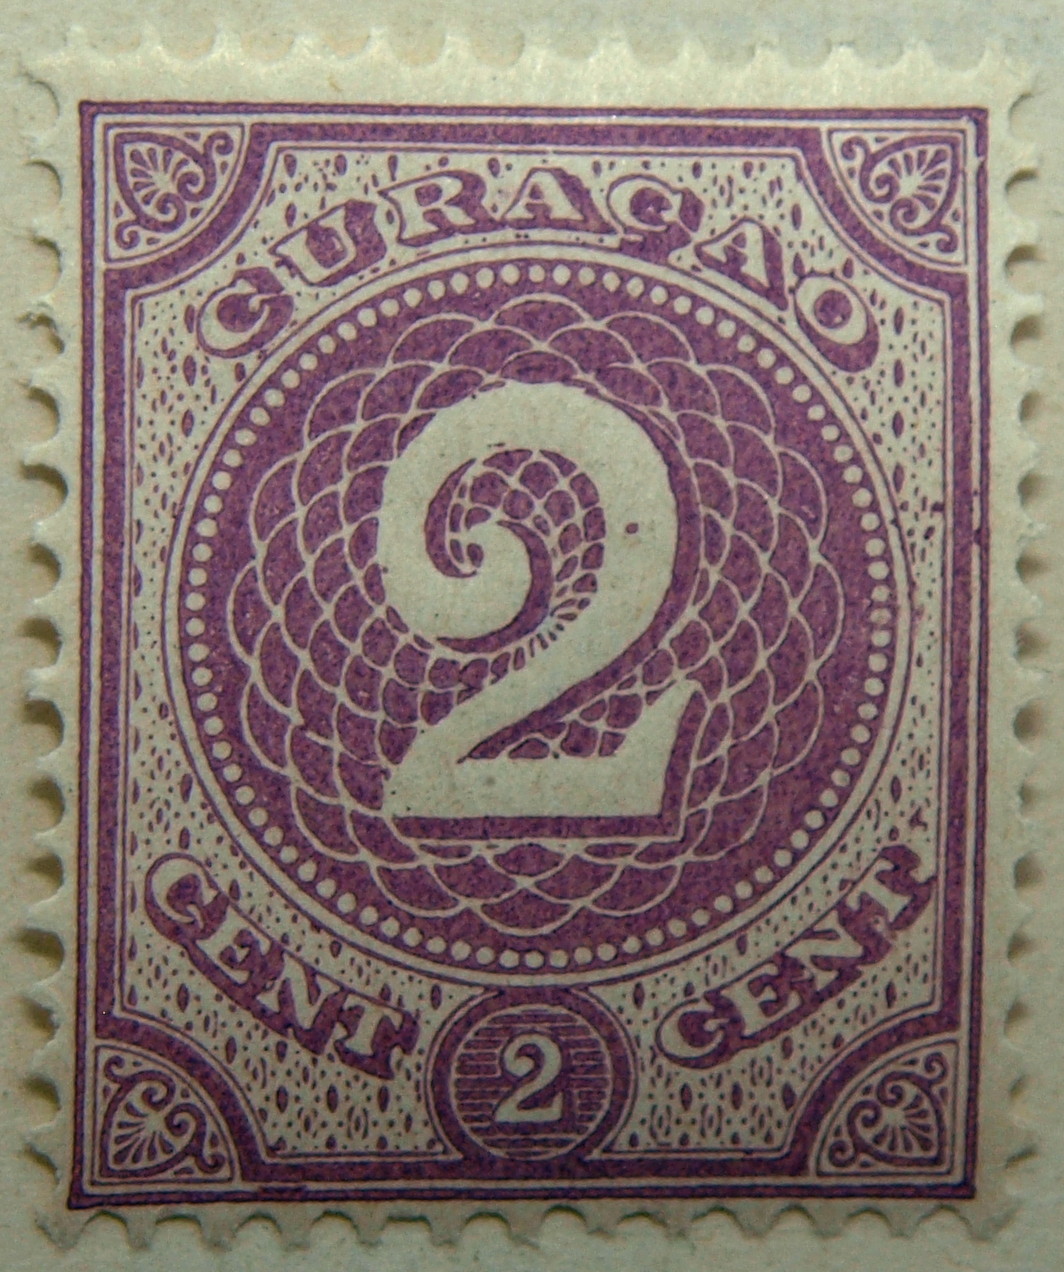 Curacao stamps